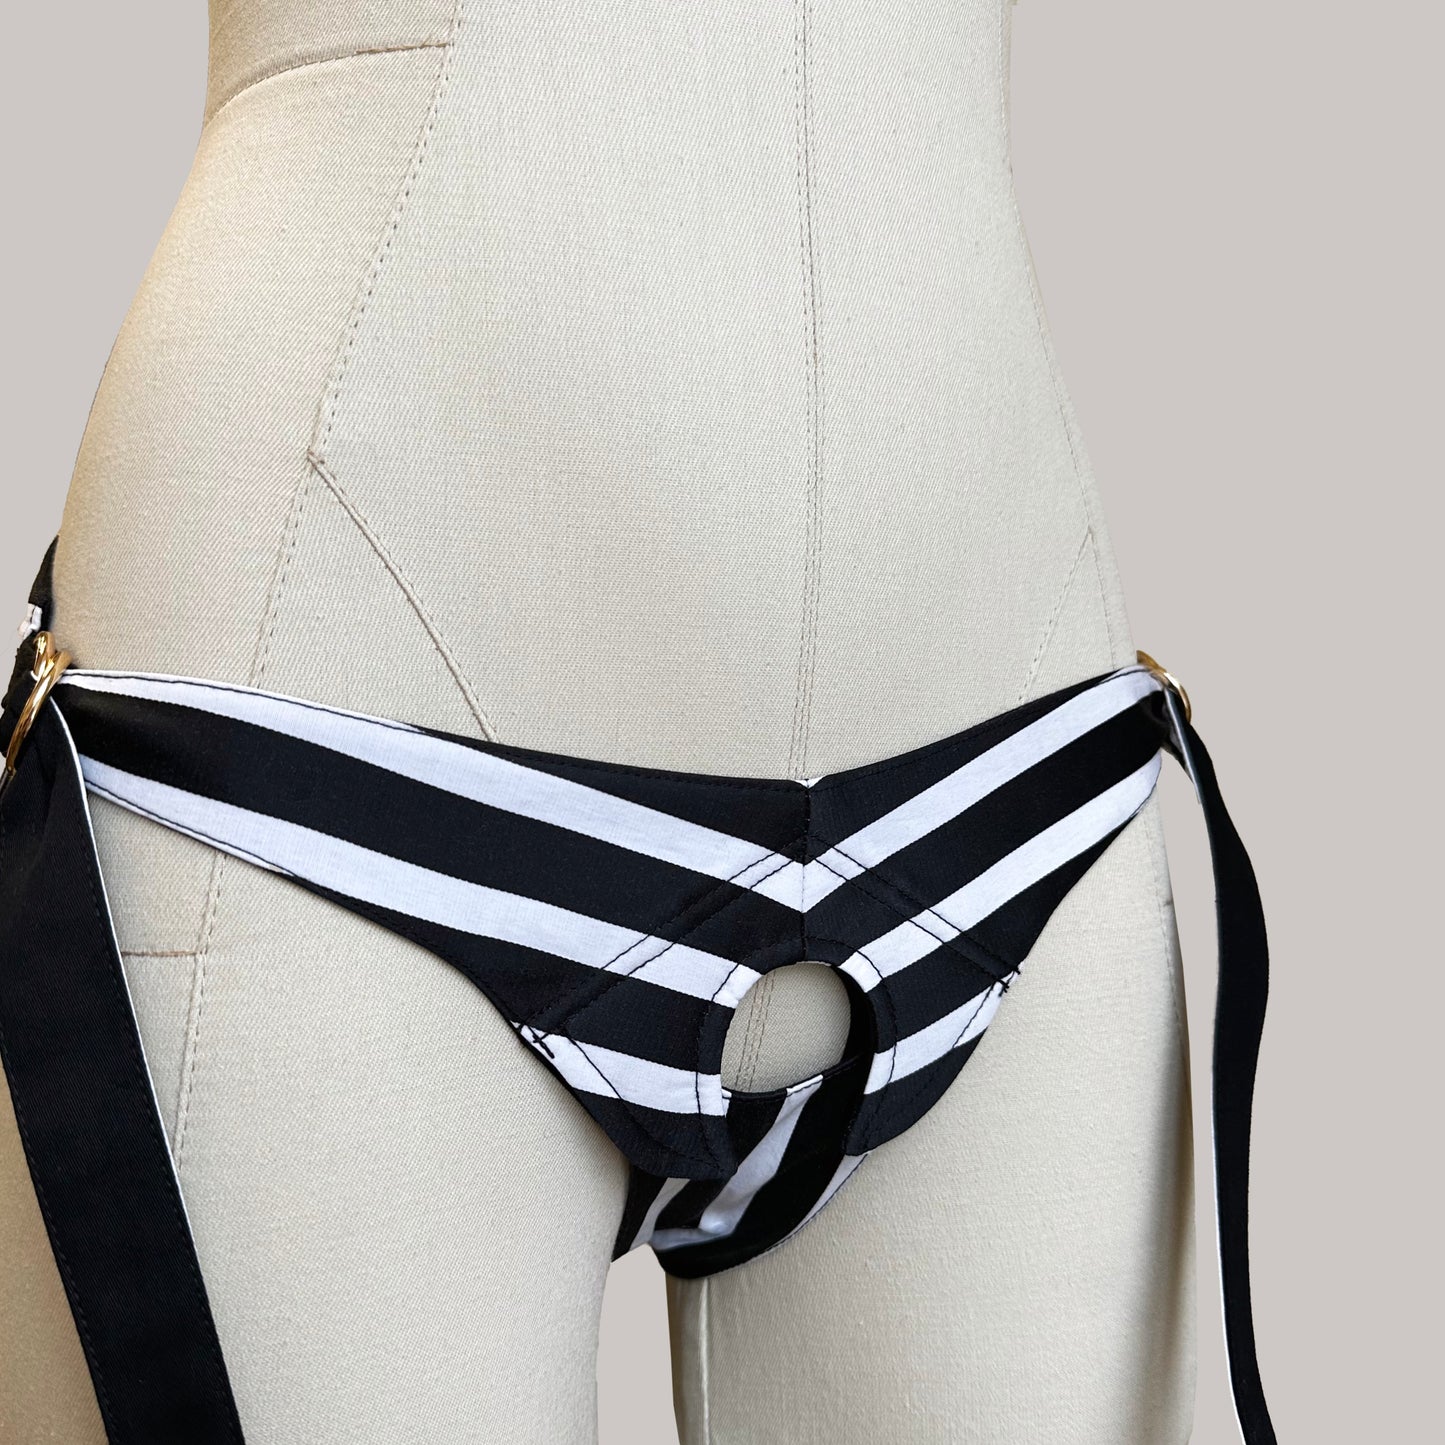 Classic Two Sides Striped Velcro Mid Rise Strap-On Harness Black